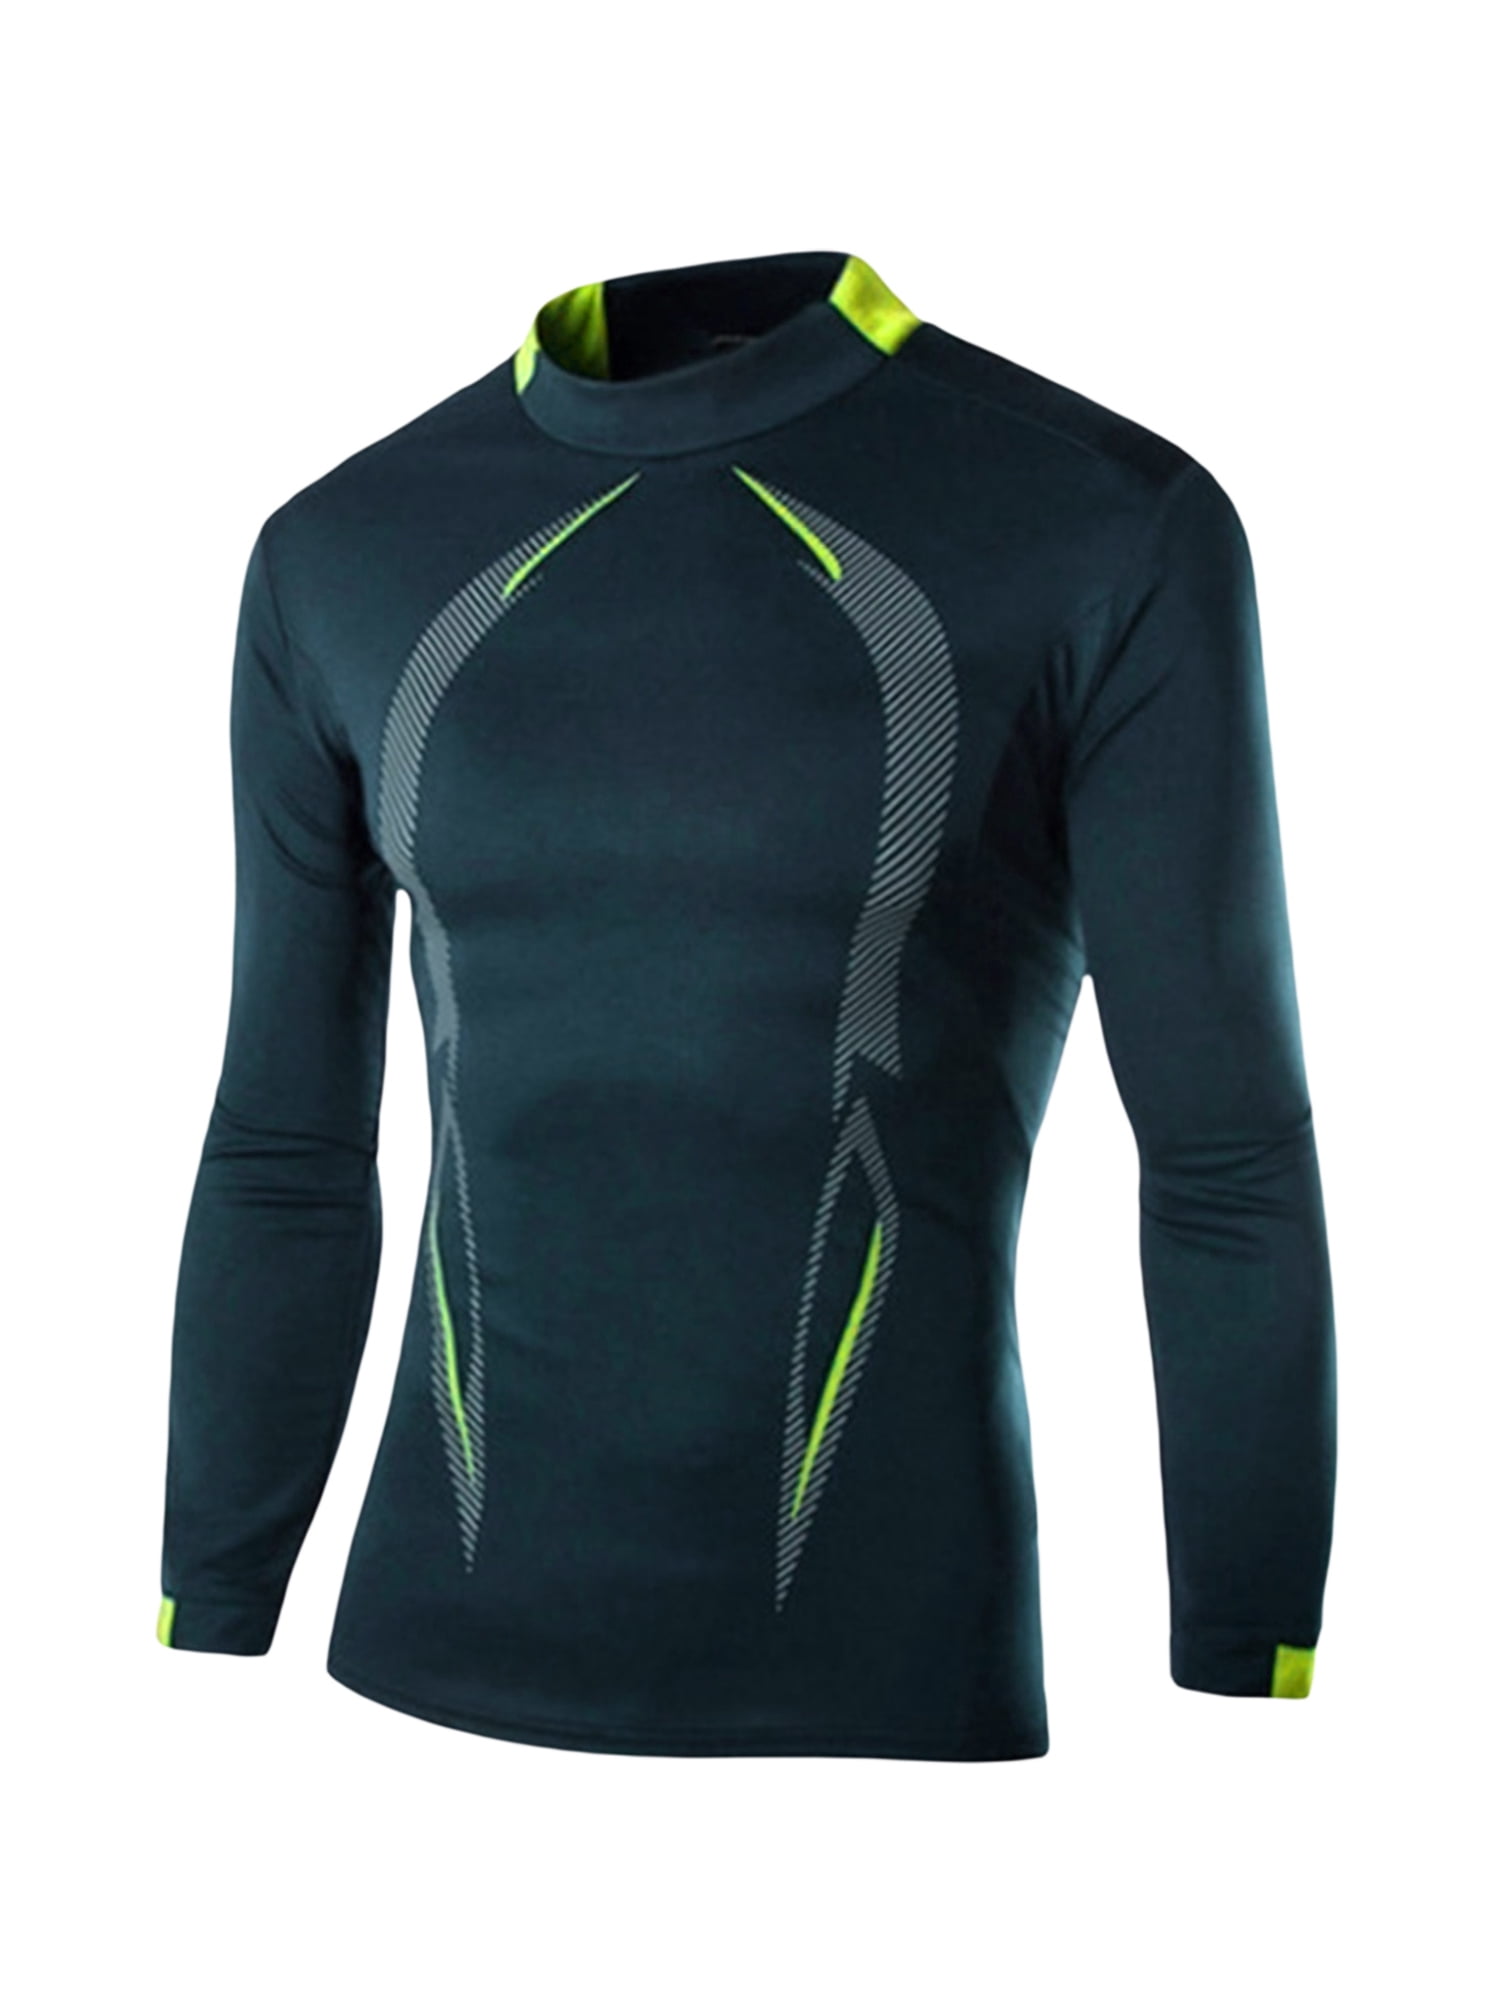 ZIYIXIN Mens Long Sleeve Compression Work Out Shirts, Round Neck ...